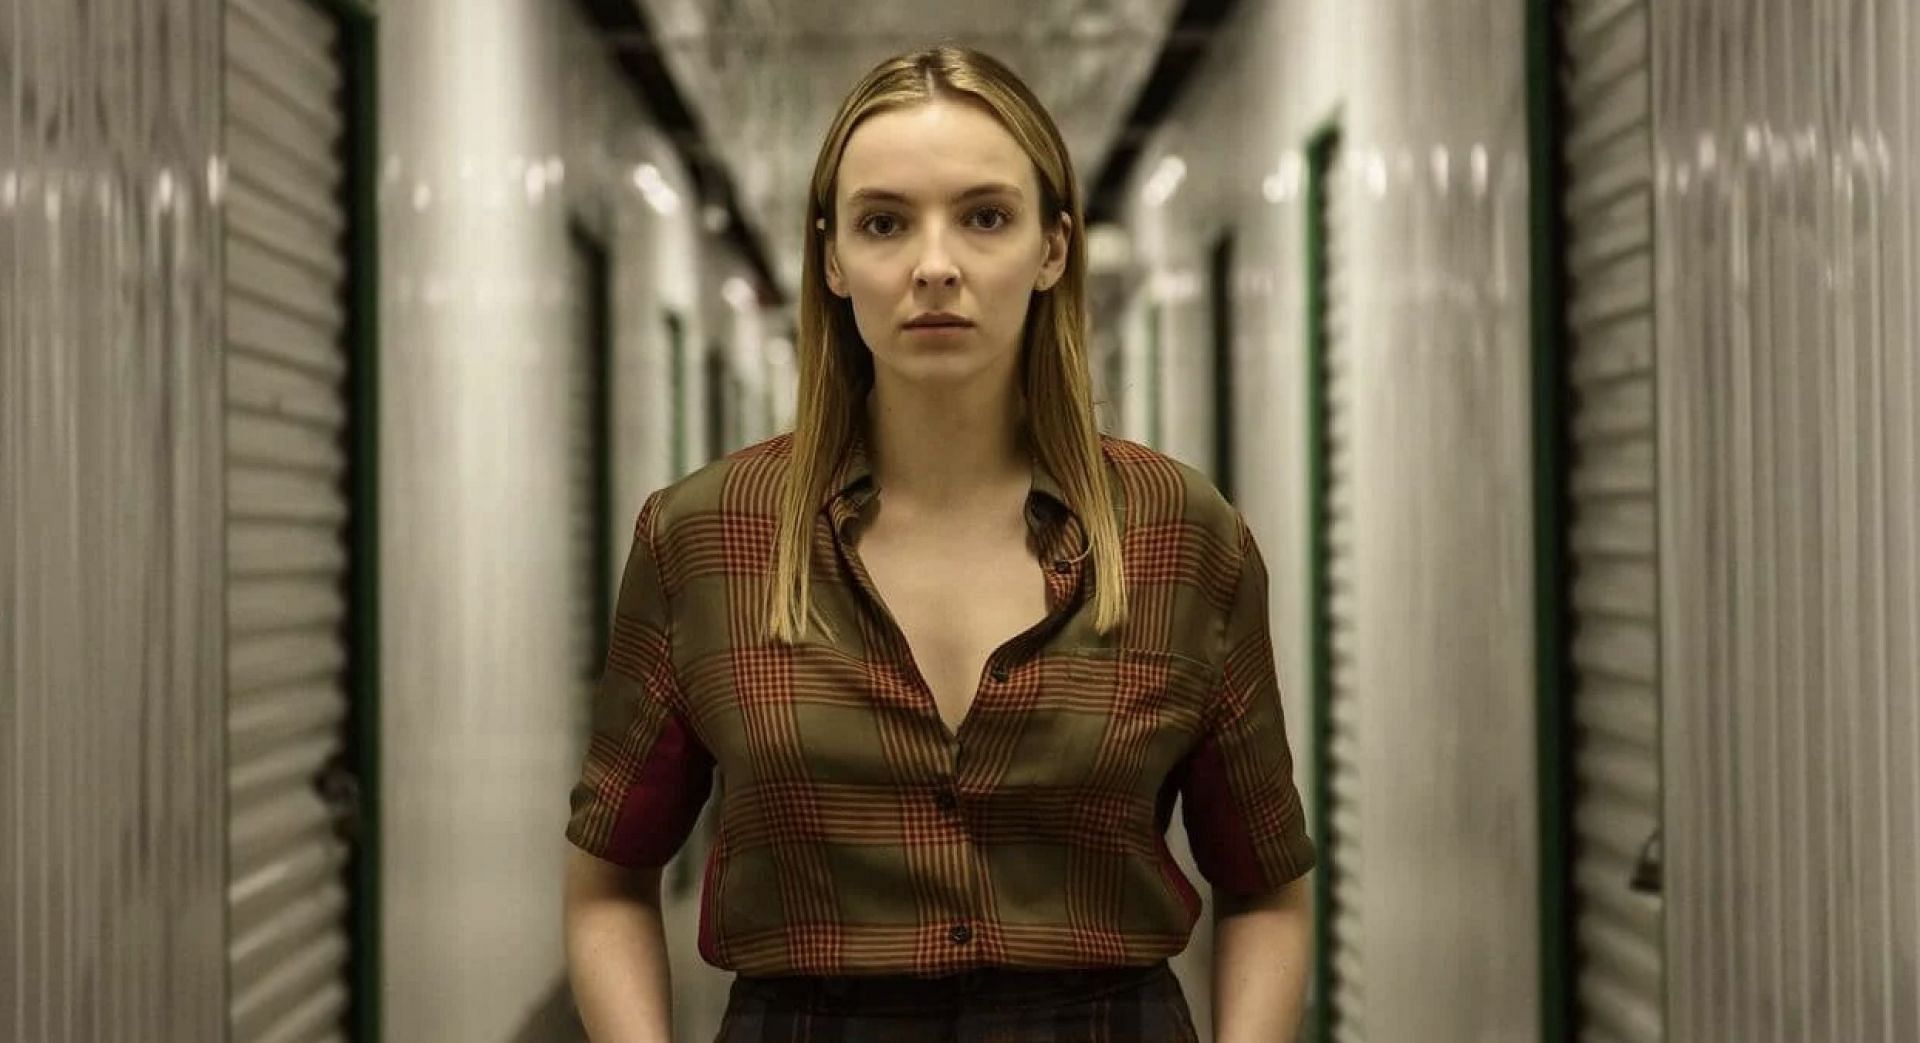 With an Emmy win and action-film experience, Jodie Comer could bring star-quality to the Fantastic Four as Sue Storm, adding a new level of depth to the character (Image via Gettty)